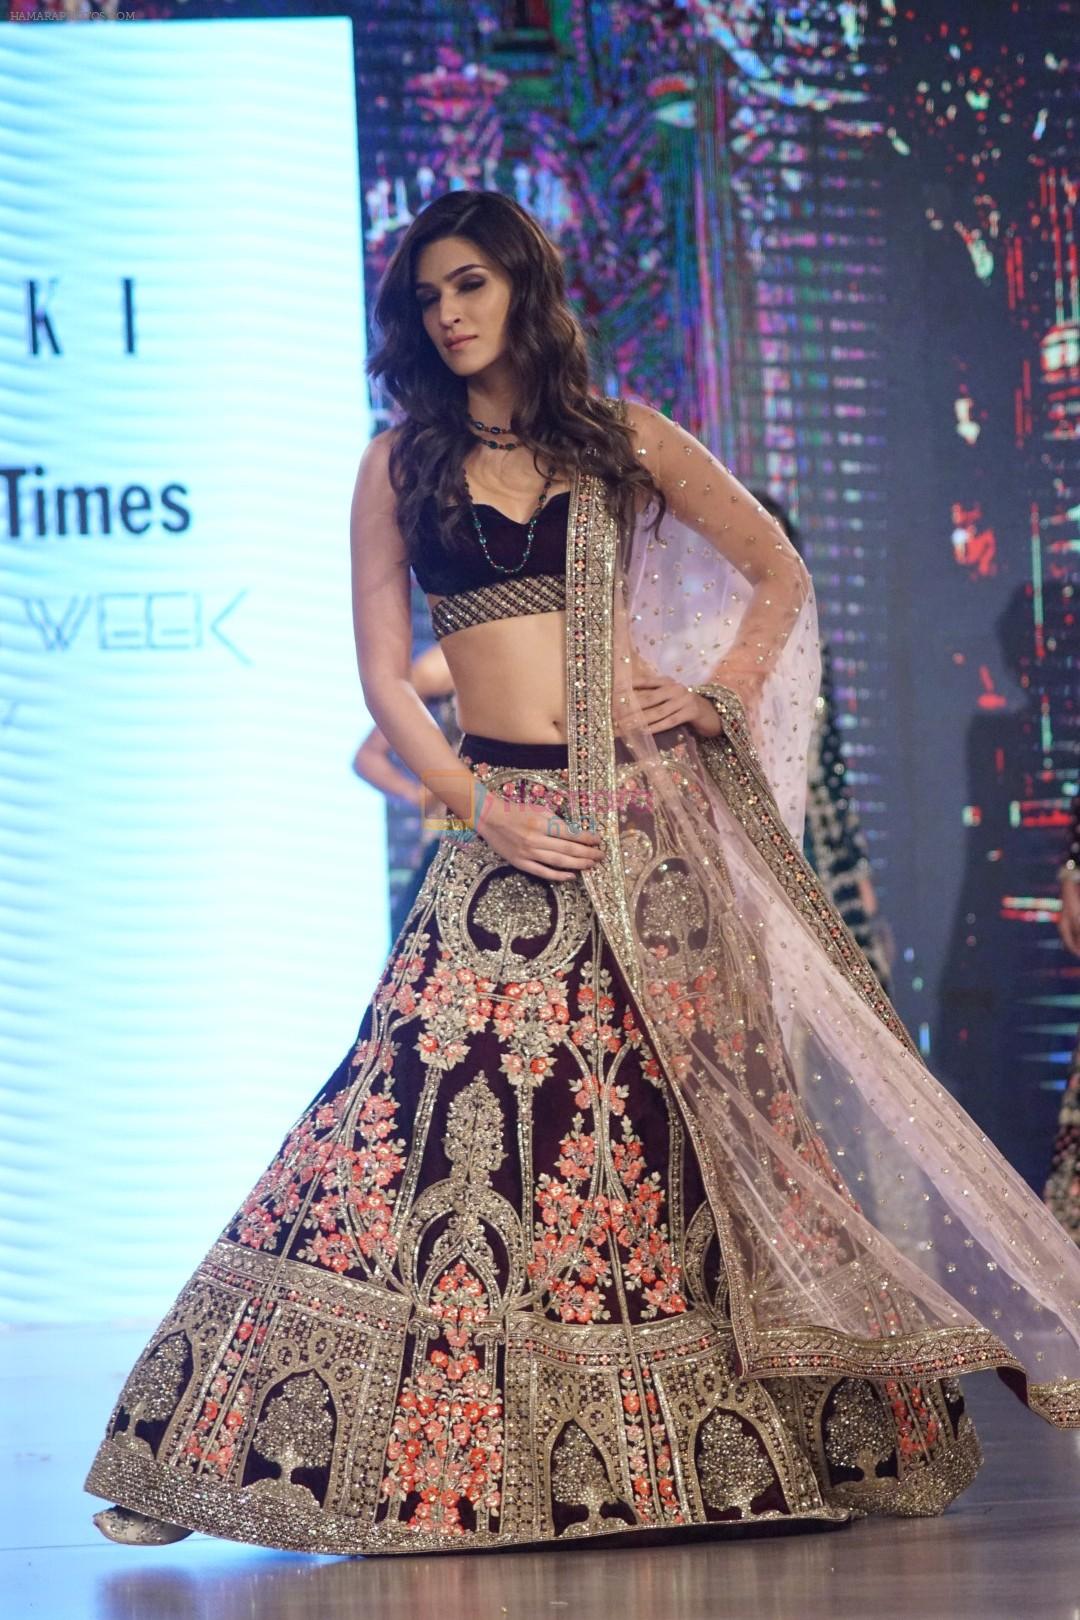 Kriti Sanon Walks The Ramp For Rocky S At Bombay Times Fashion Week 2017 on 10th Sept 2017